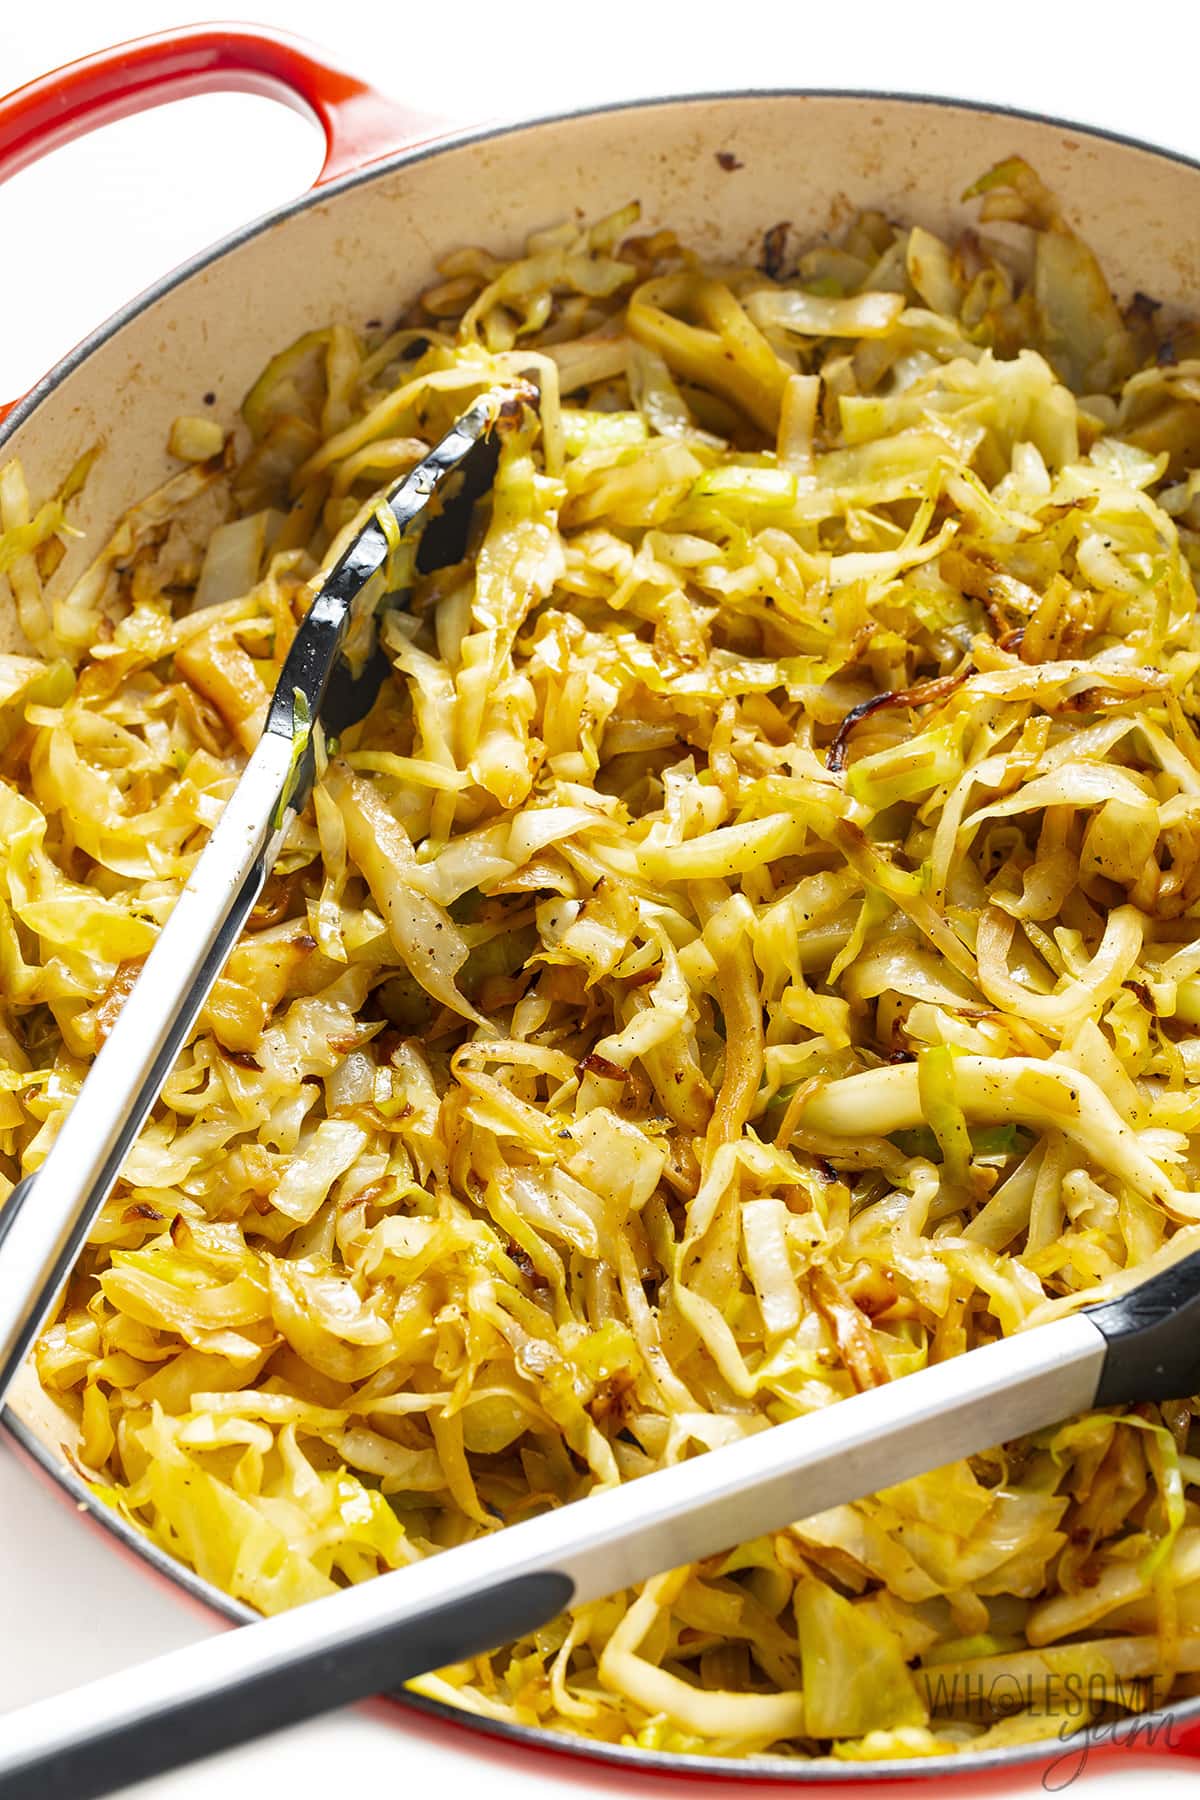 Sauteed cabbage recipe with tongs.